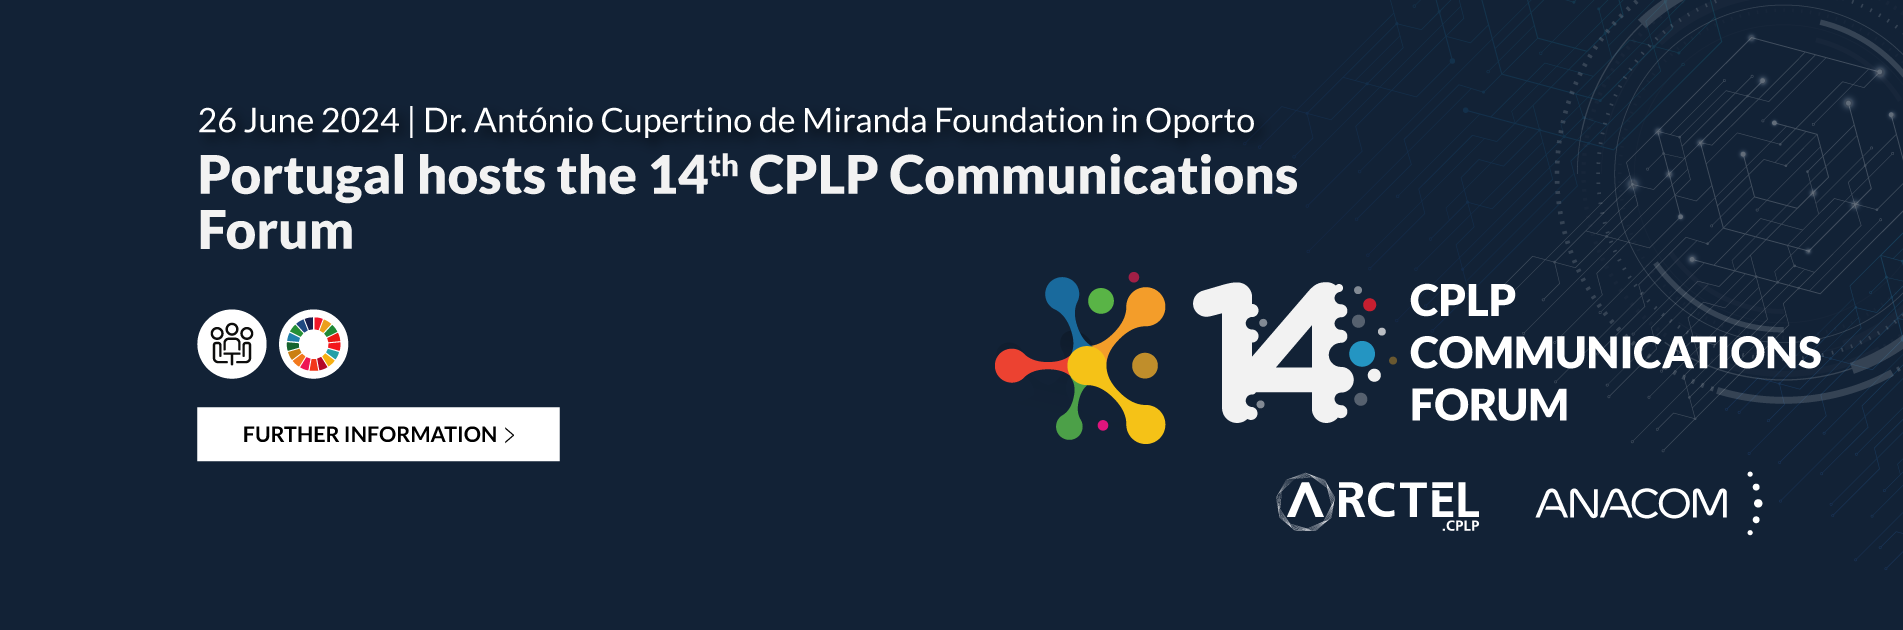 14th CPLP Communications Forum